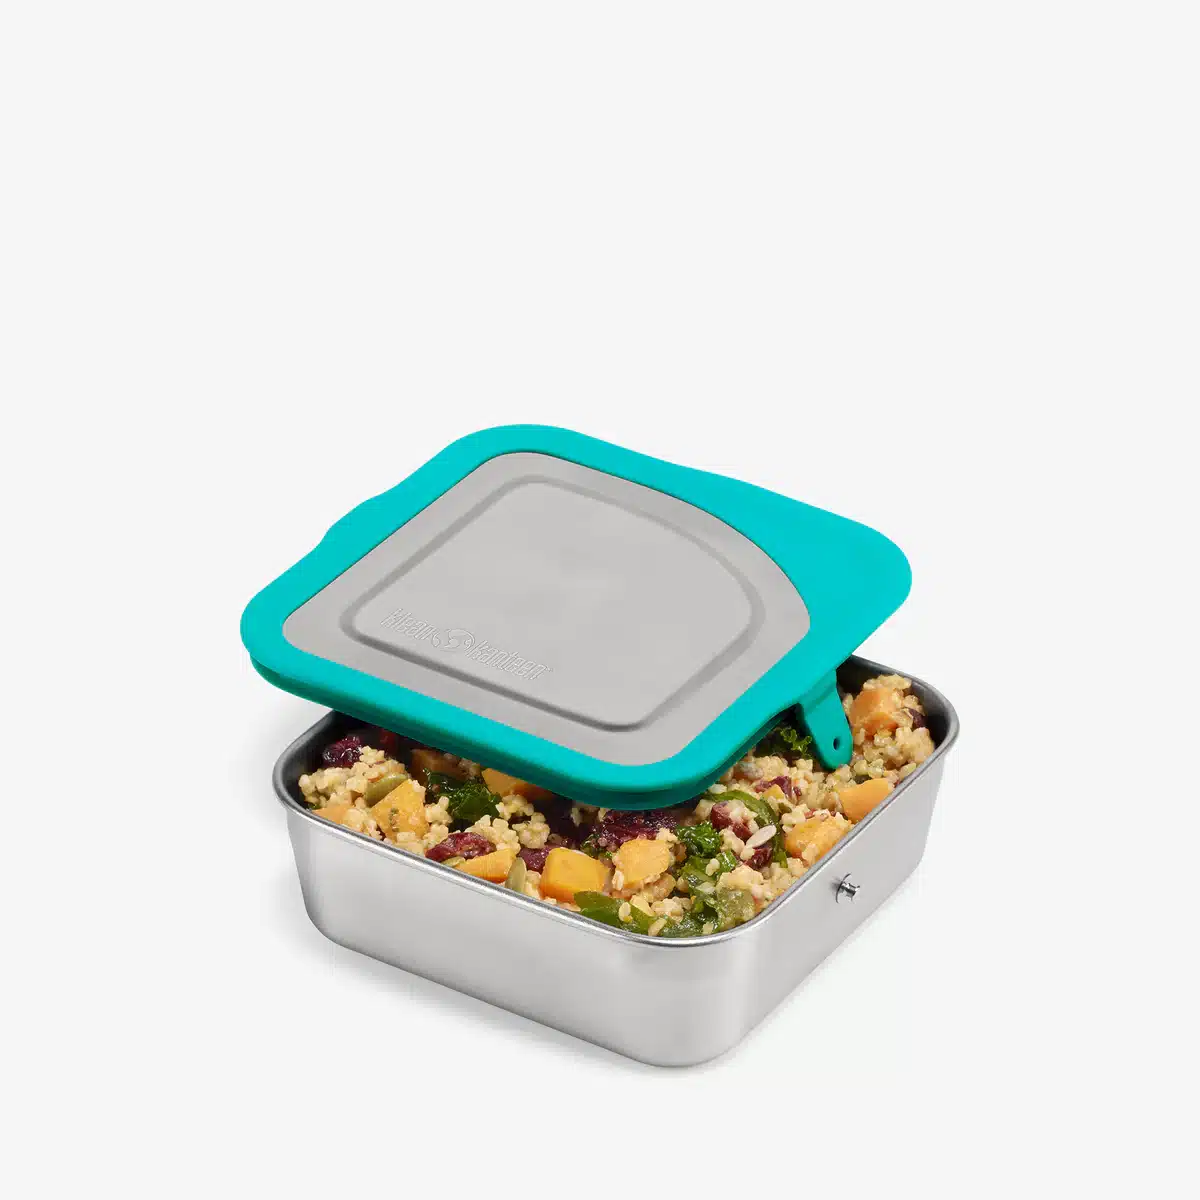 Klean Kanteen Lunch Size Food Box from Gimme the Good Stuff